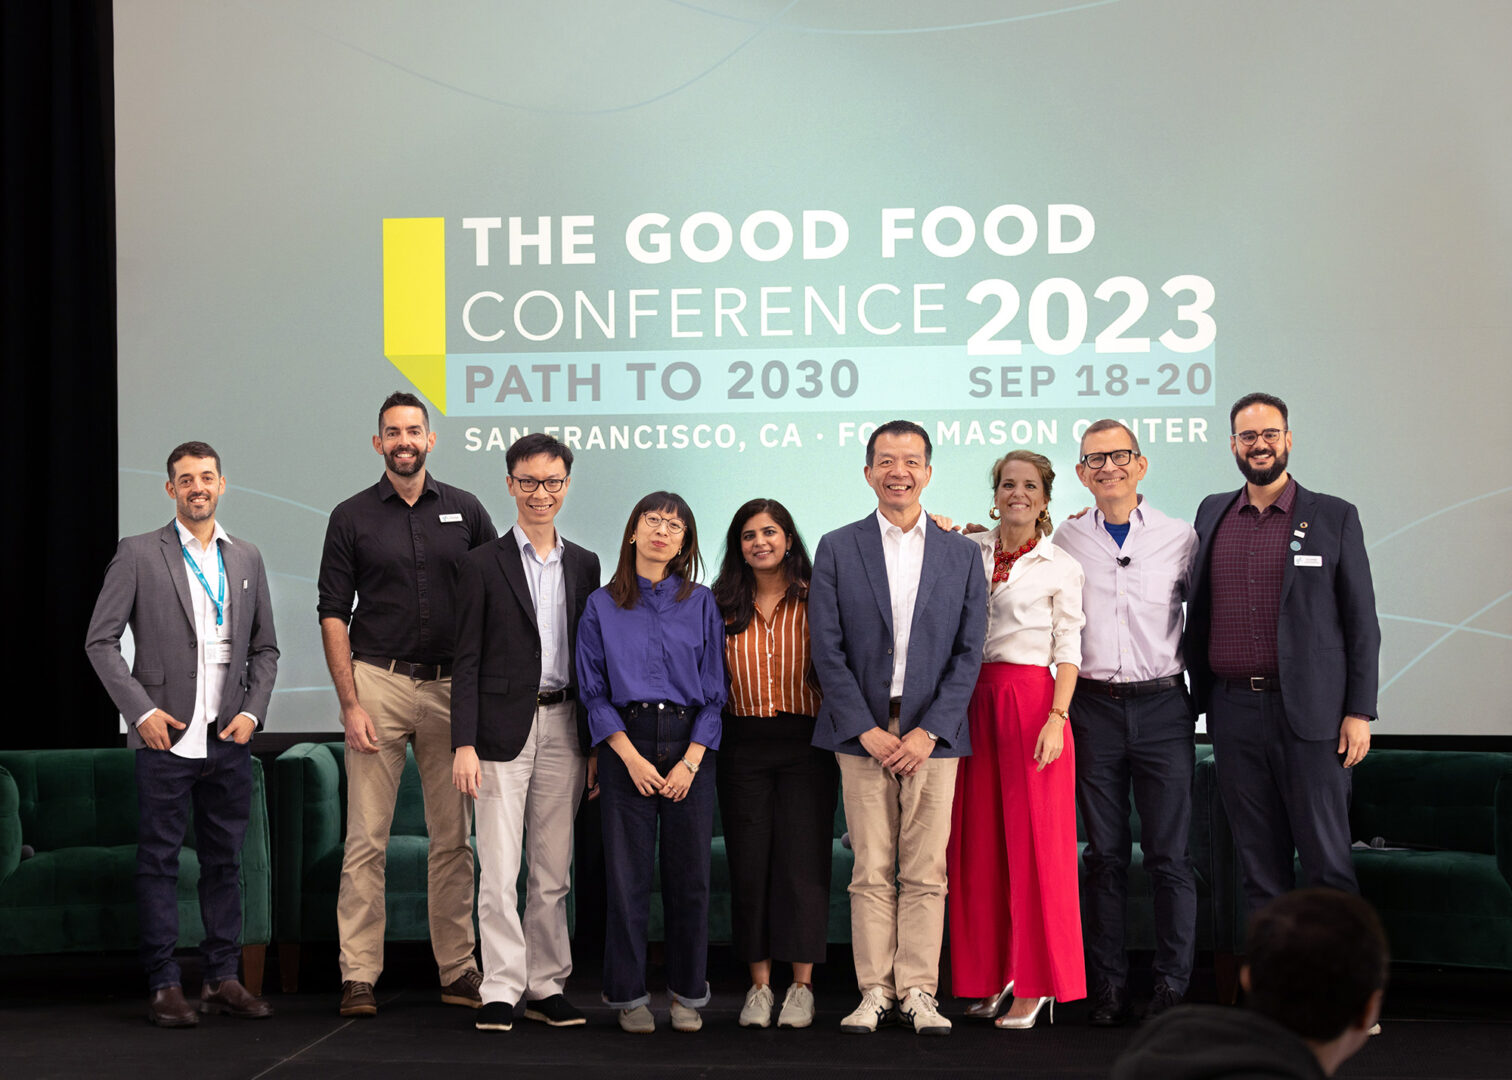 Members of the gfi team and partners from around the world gather on the main stage at the 2023 good food conference